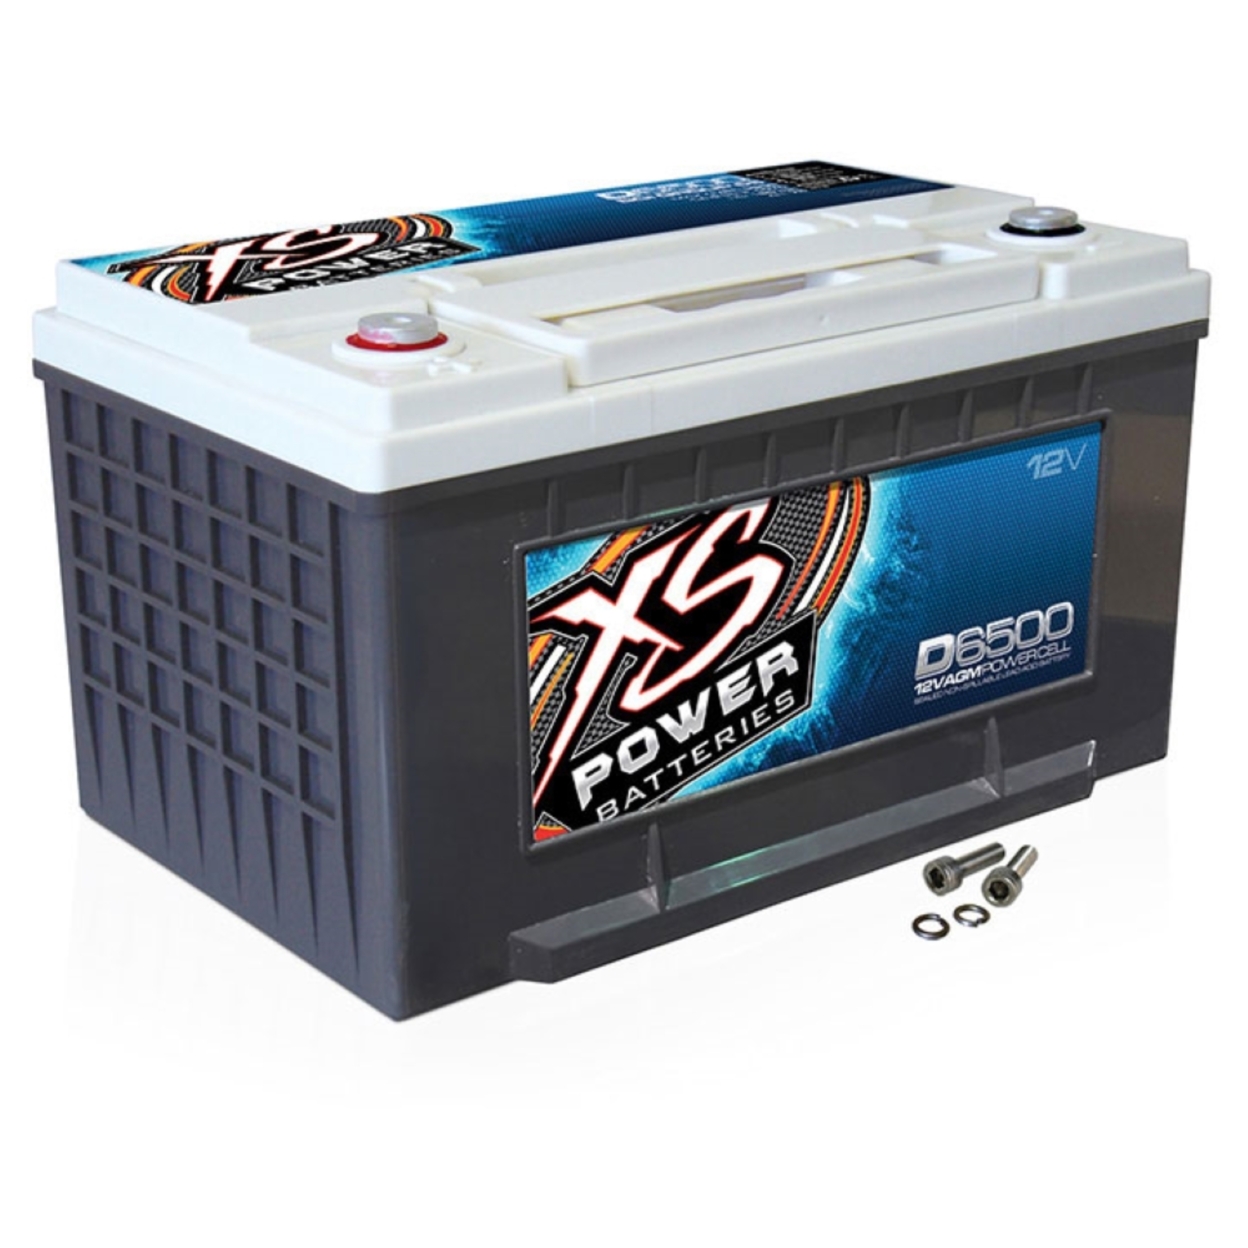 XS Power D6500 XS Series 12V 3,900 Amp AGM High Output Battery with M6 Terminal Bolt - image 1 of 5